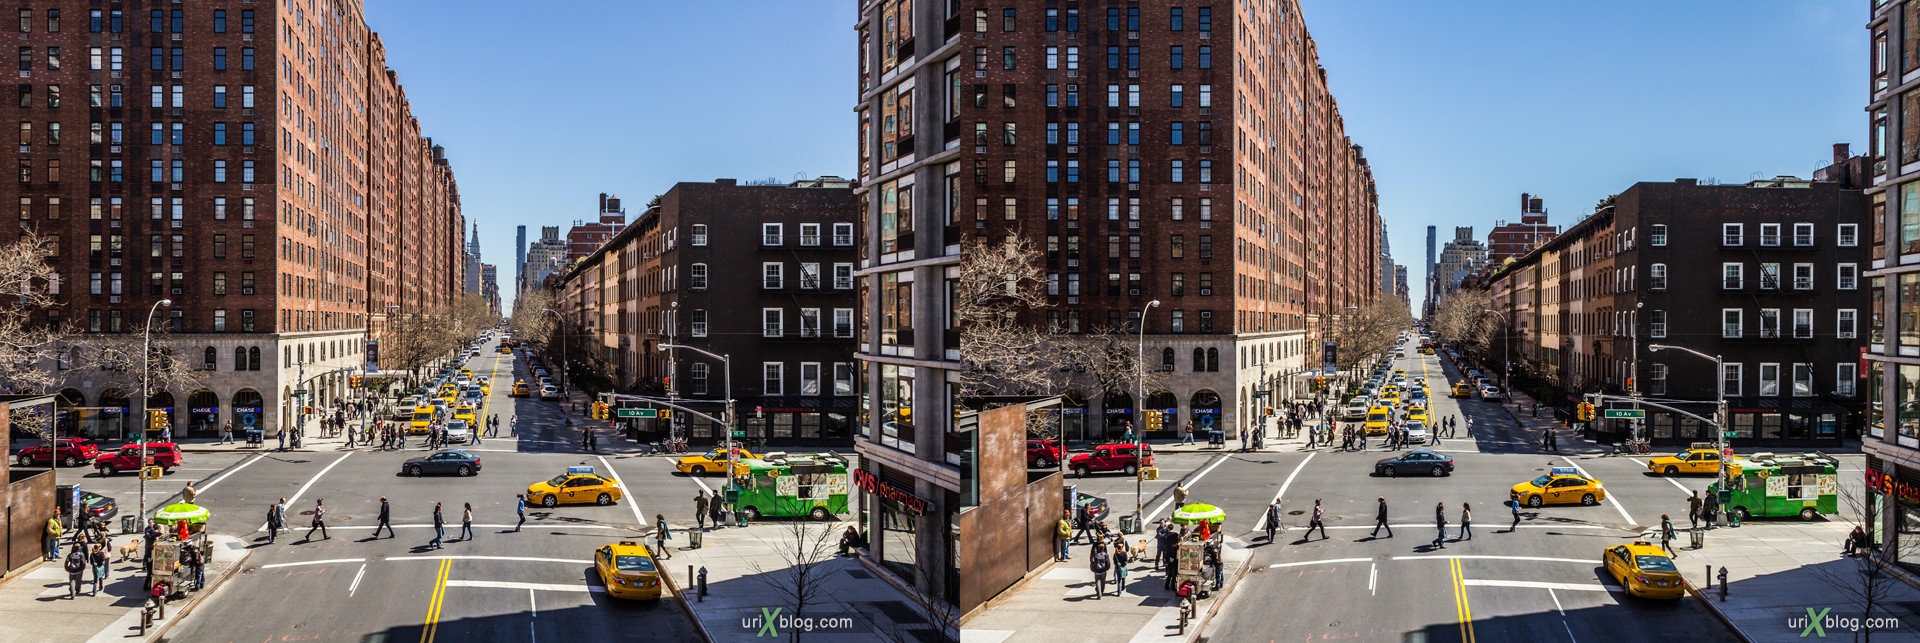 2013, NYC, New York, Manhattan, W 23rd Street, High Line, view from the top, city, building, skyscraper, panorama, 3D, stereo pair, cross-eyed, crossview, cross view stereo pair, stereoscopic